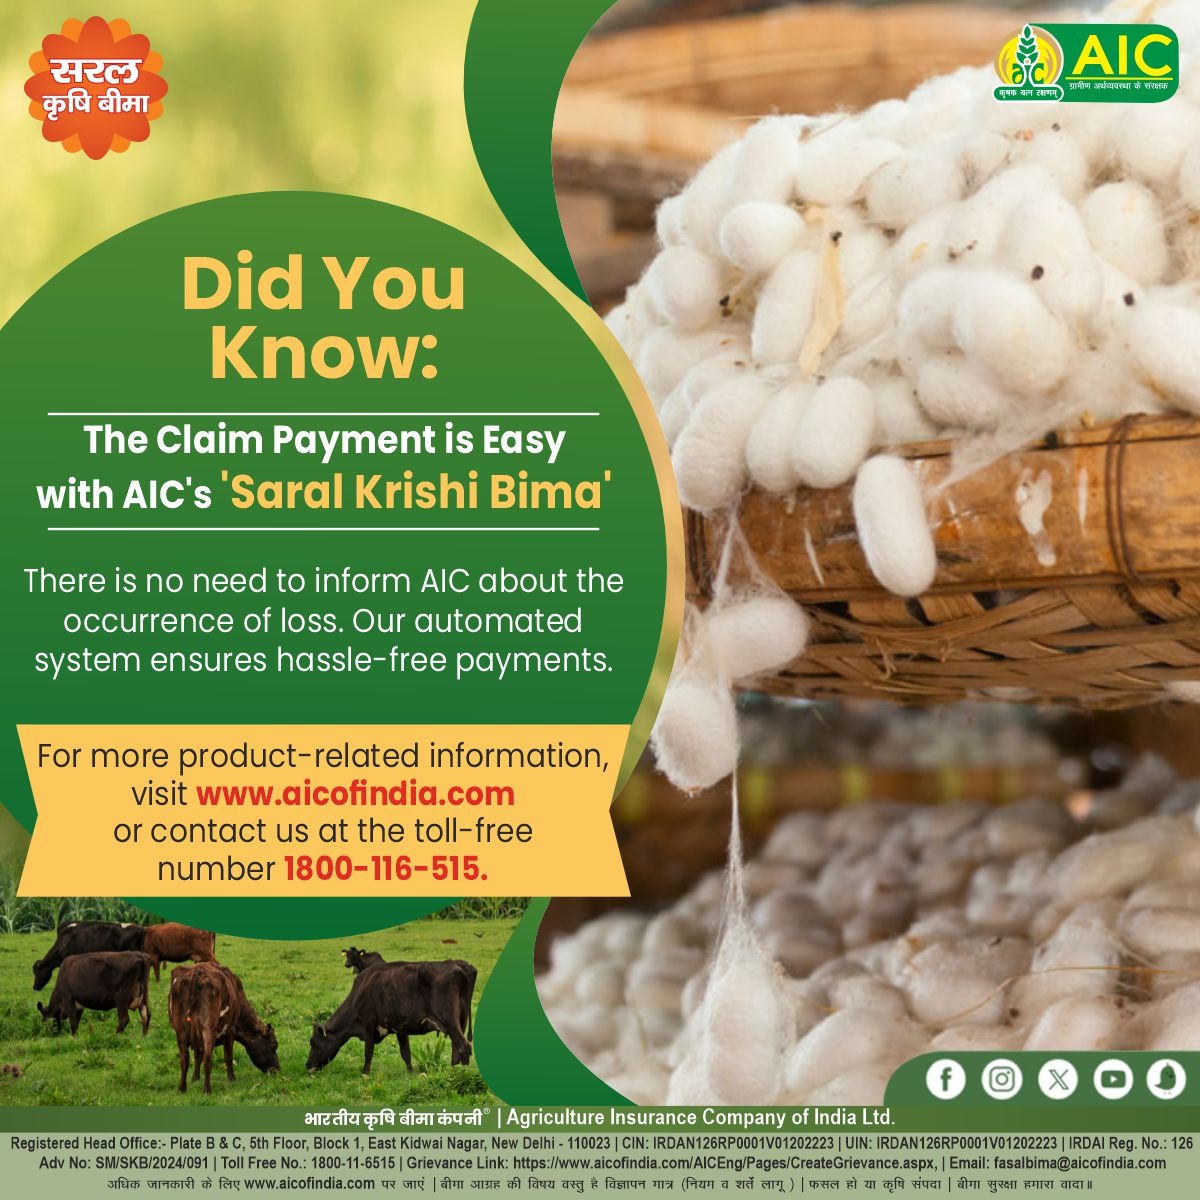 Whether it's a natural calamity or unforeseen occurrences, AIC is with the farmers. Protect and insure your agriculture and allied businesses with AIC's 'Saral Krishi Bima'. For more information, visit aicofindia.com or contact at Toll-Free Number 1800-116-515. #AIC…